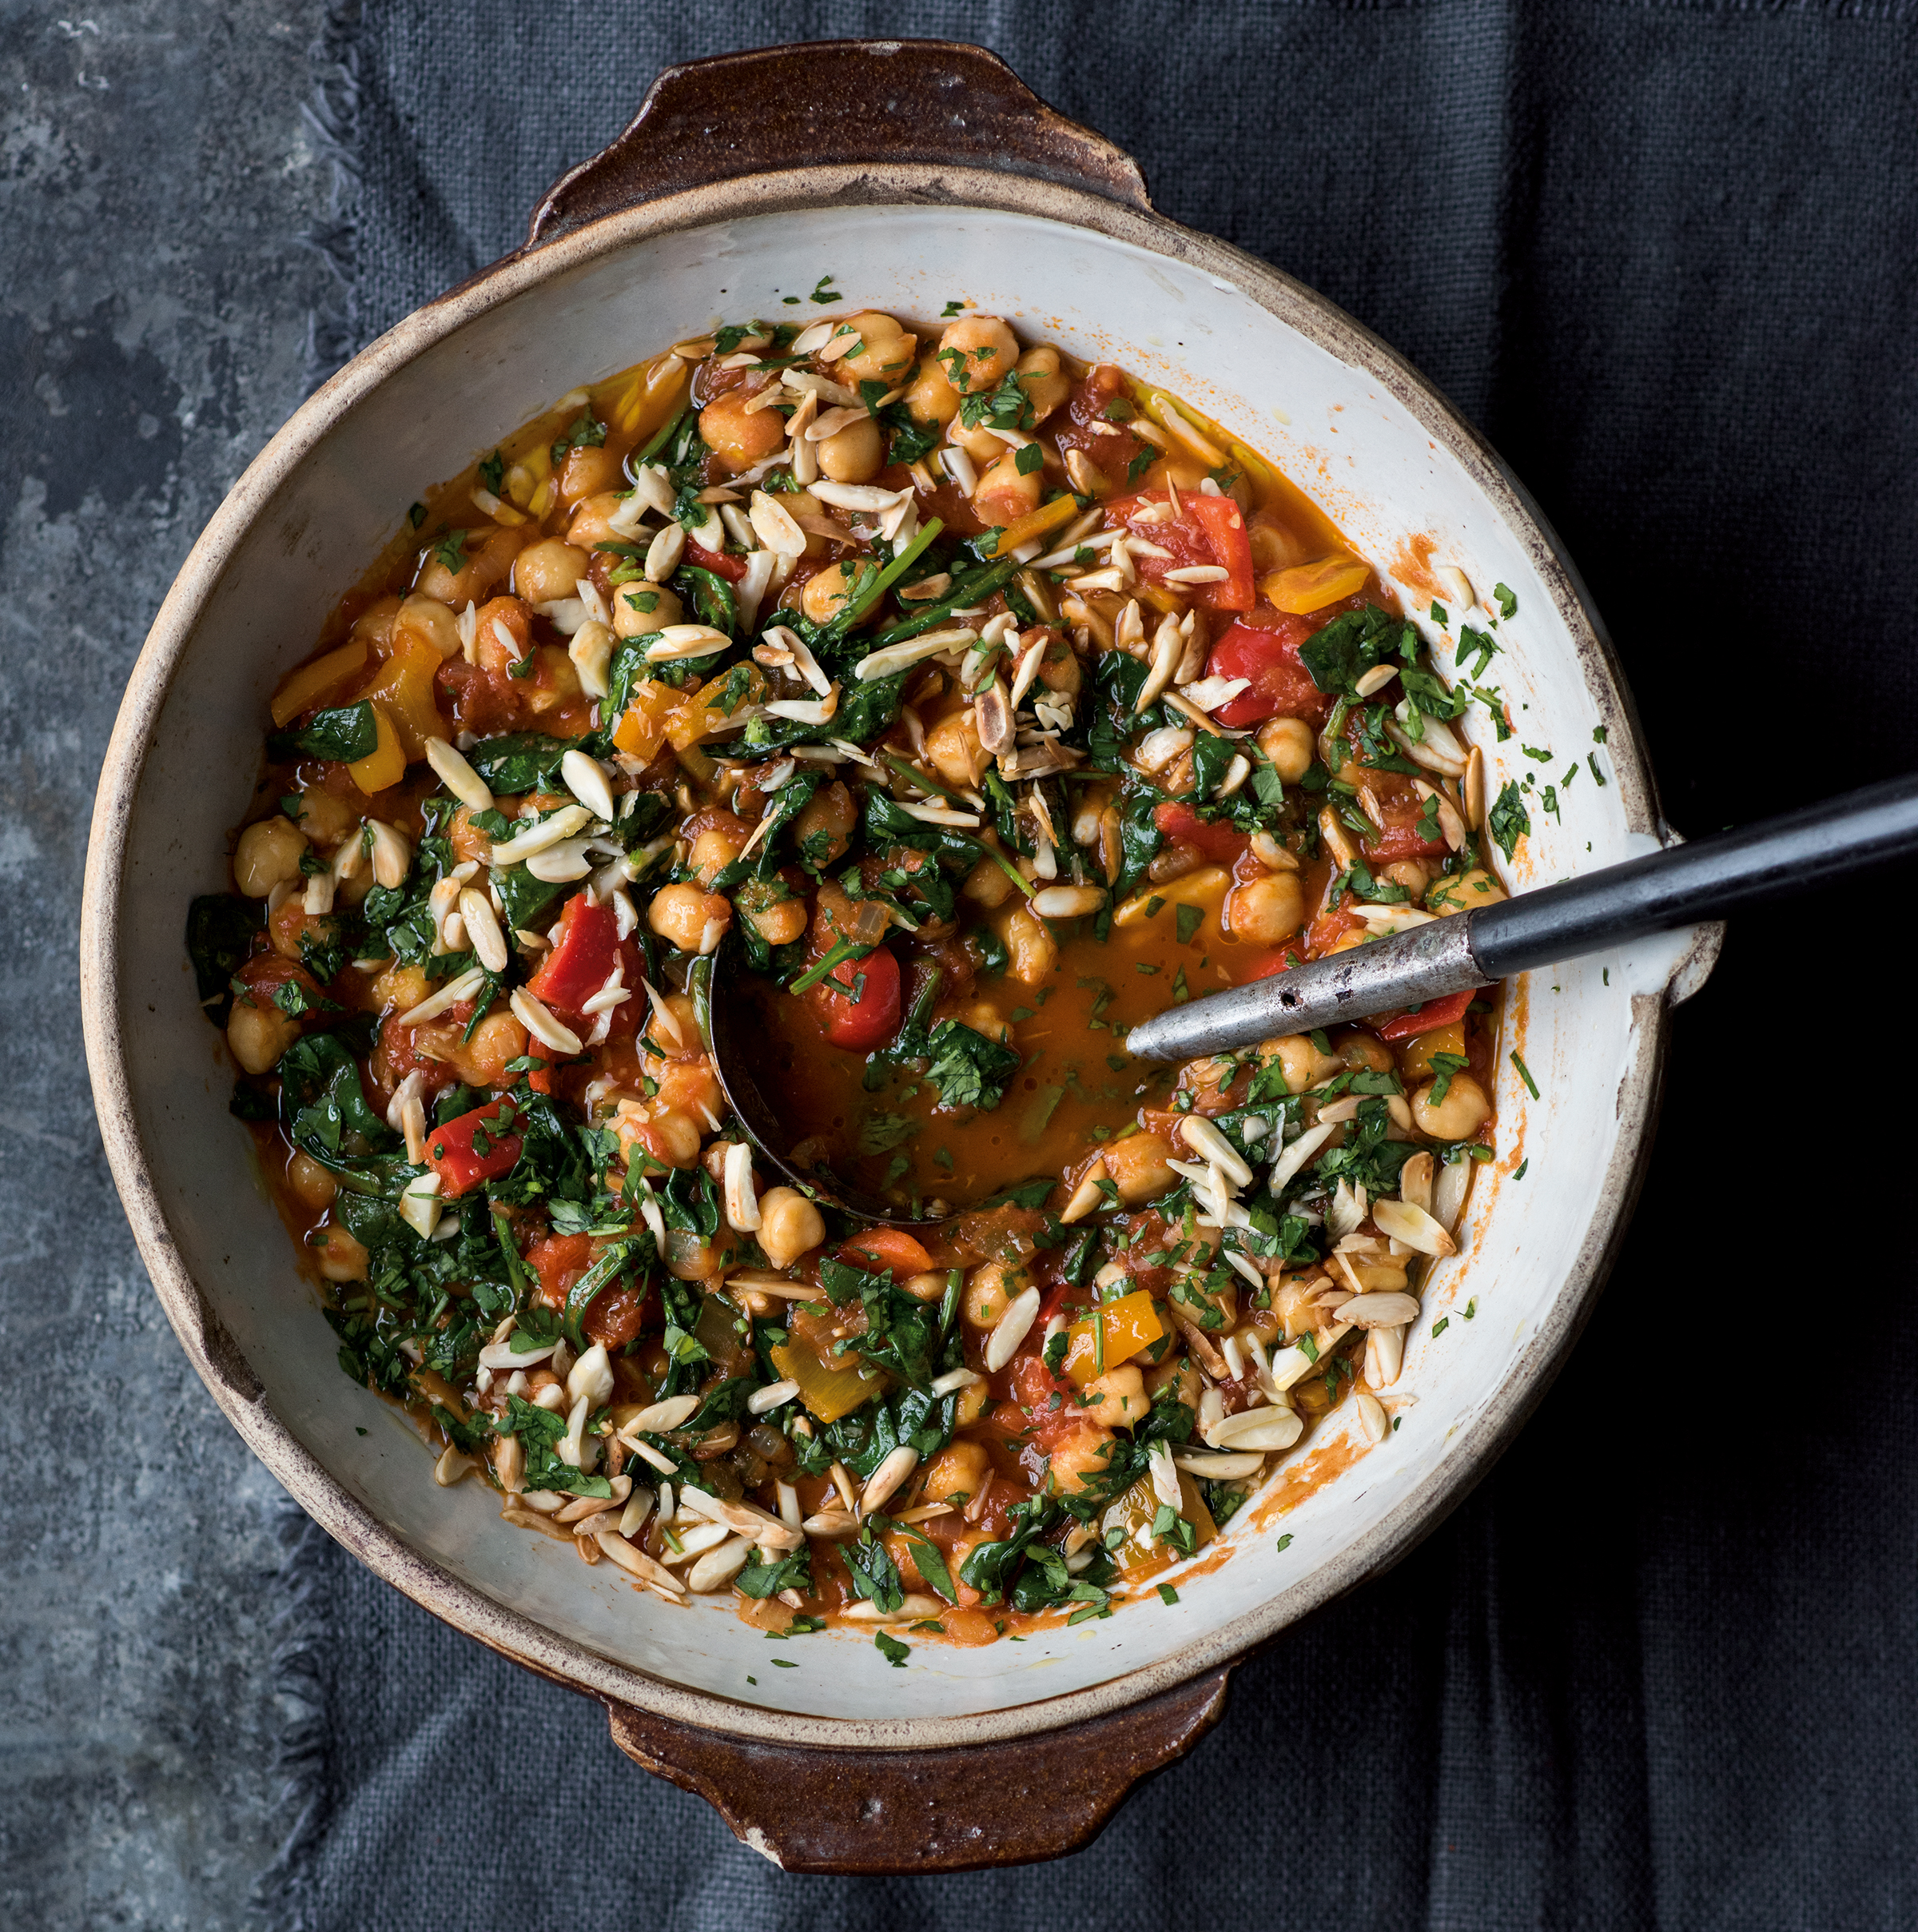 How to make Melissa Hemsley's Spanish chickpea and almond stew